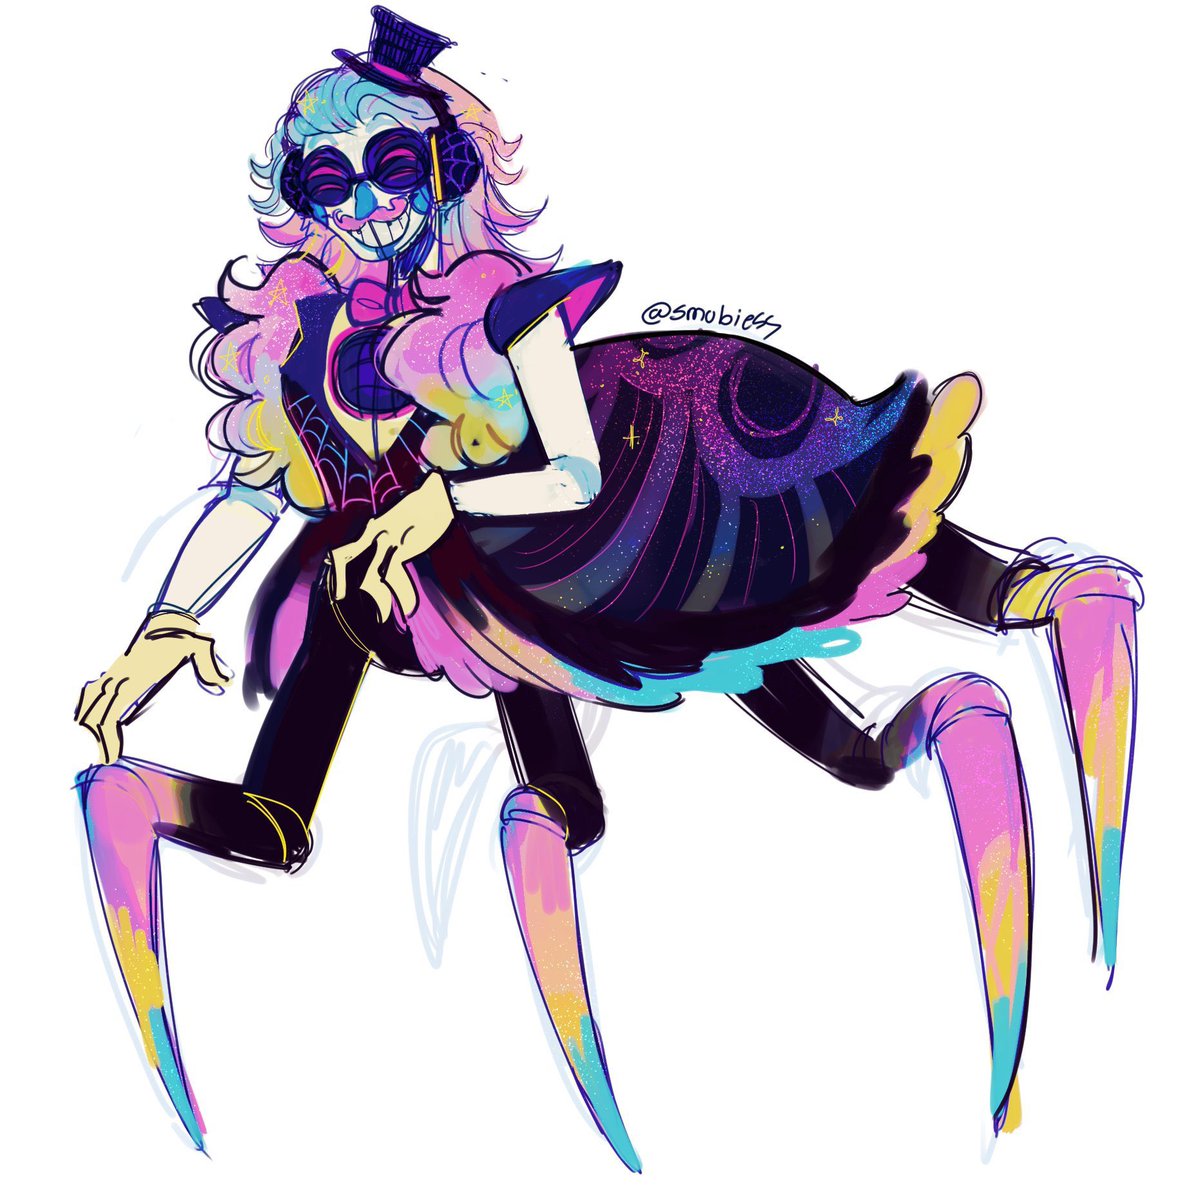 i cannot believe i’ve been neglecting my arachnid man im so sorry DJMM